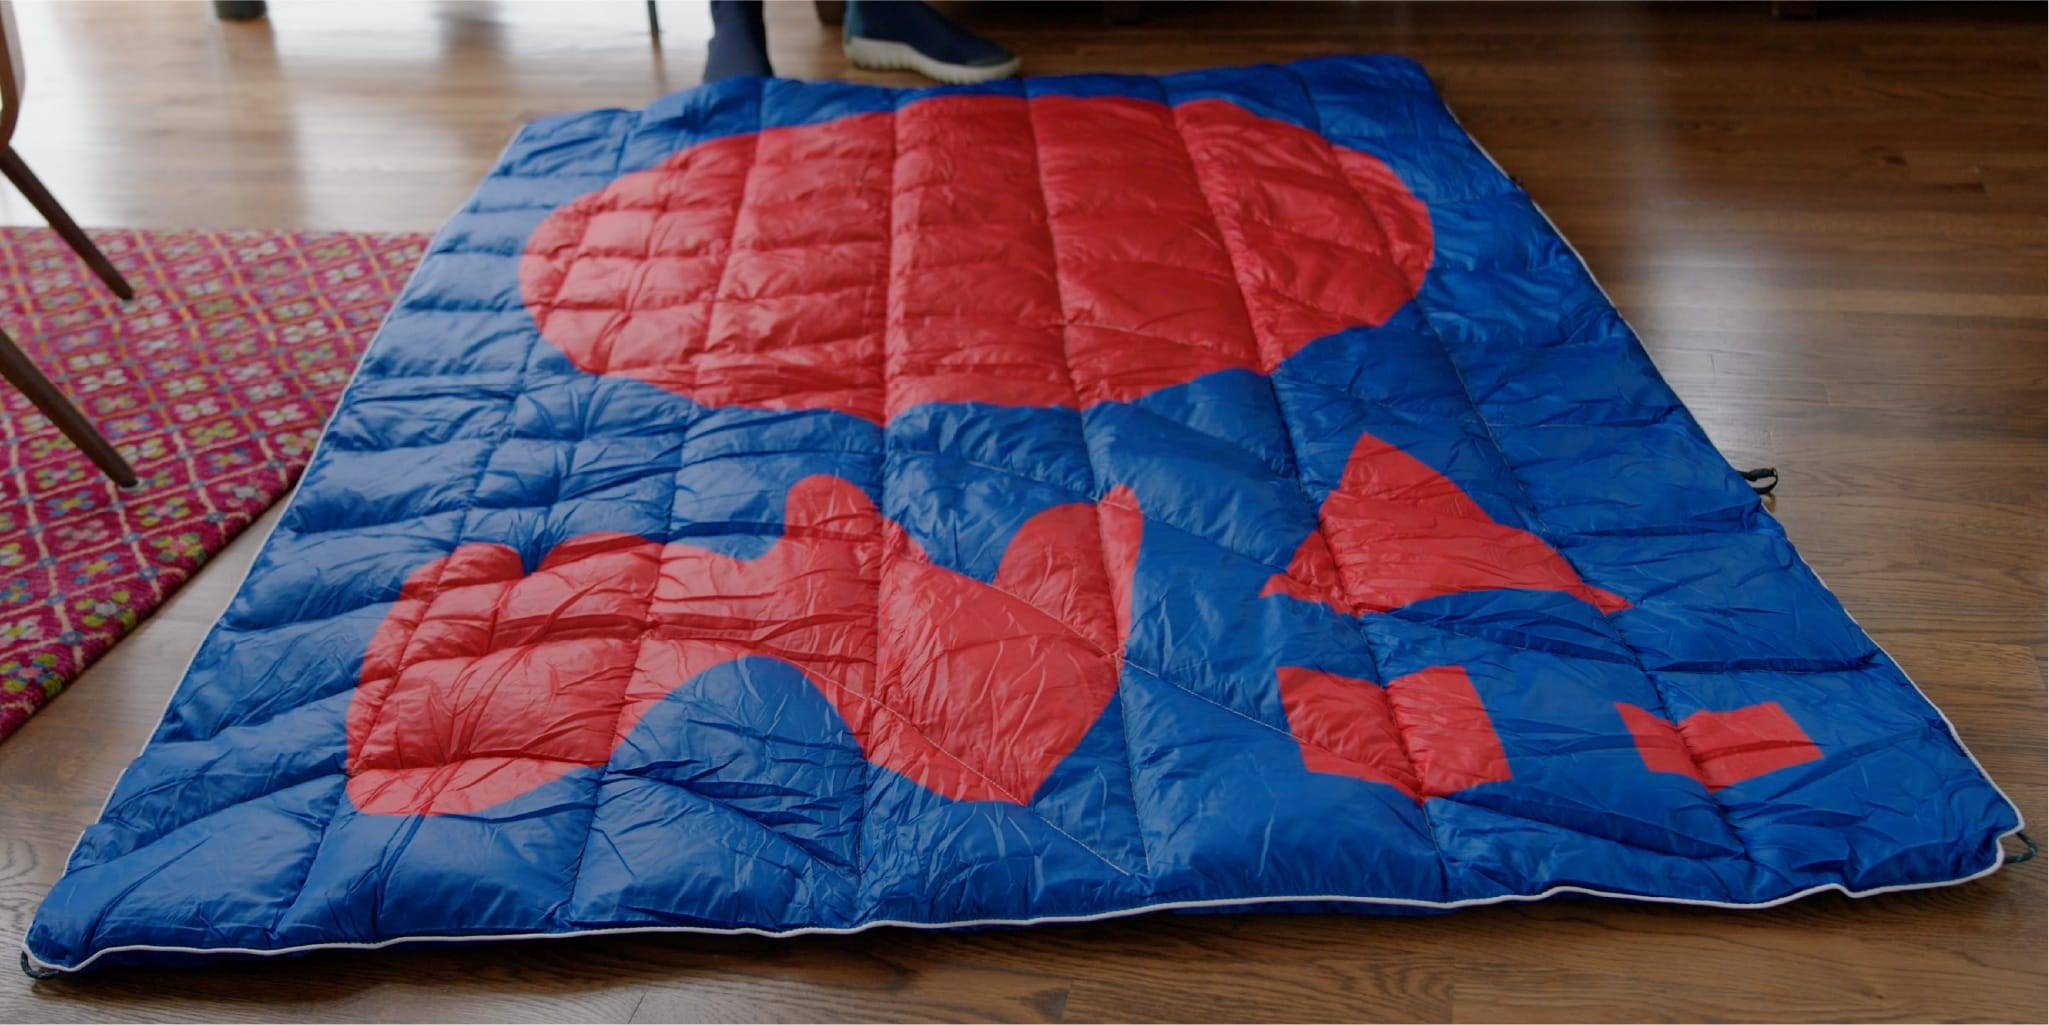 Rumpl Beautiful Shapes red and blue Sagmeister blanket